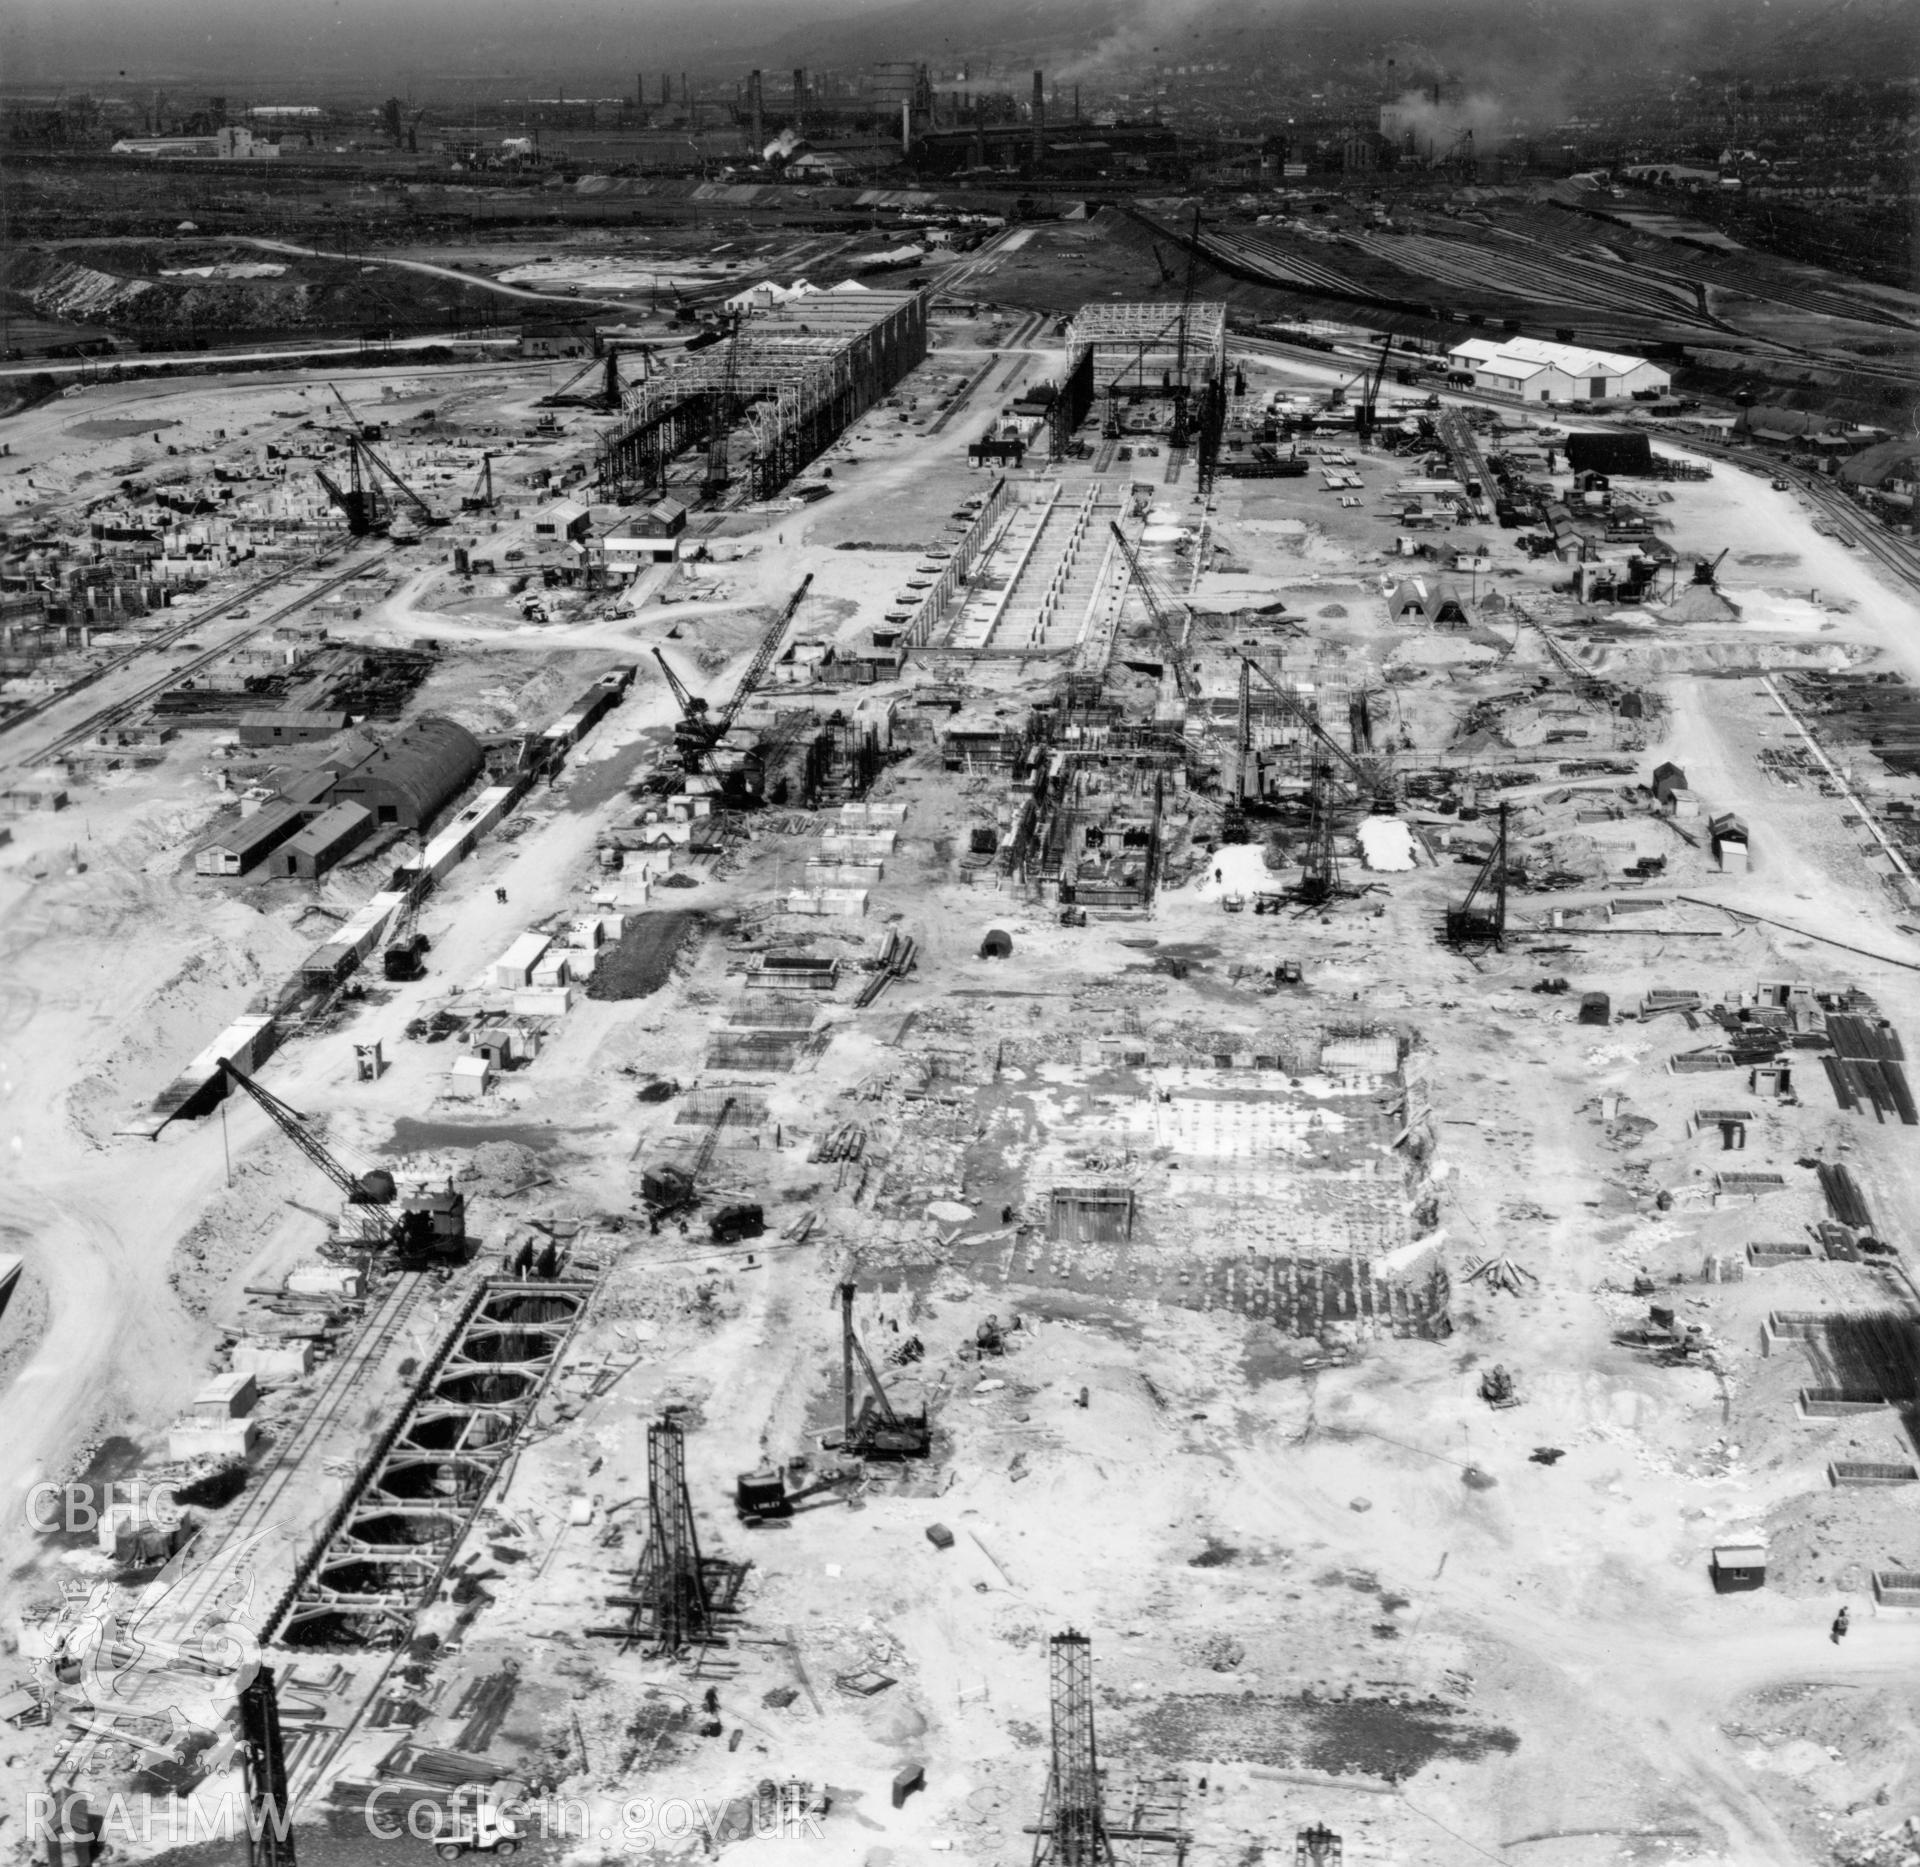 General view of Margam Steelworks, Port Talbot, under construction. Oblique aerial photograph, 5?" cut roll film.